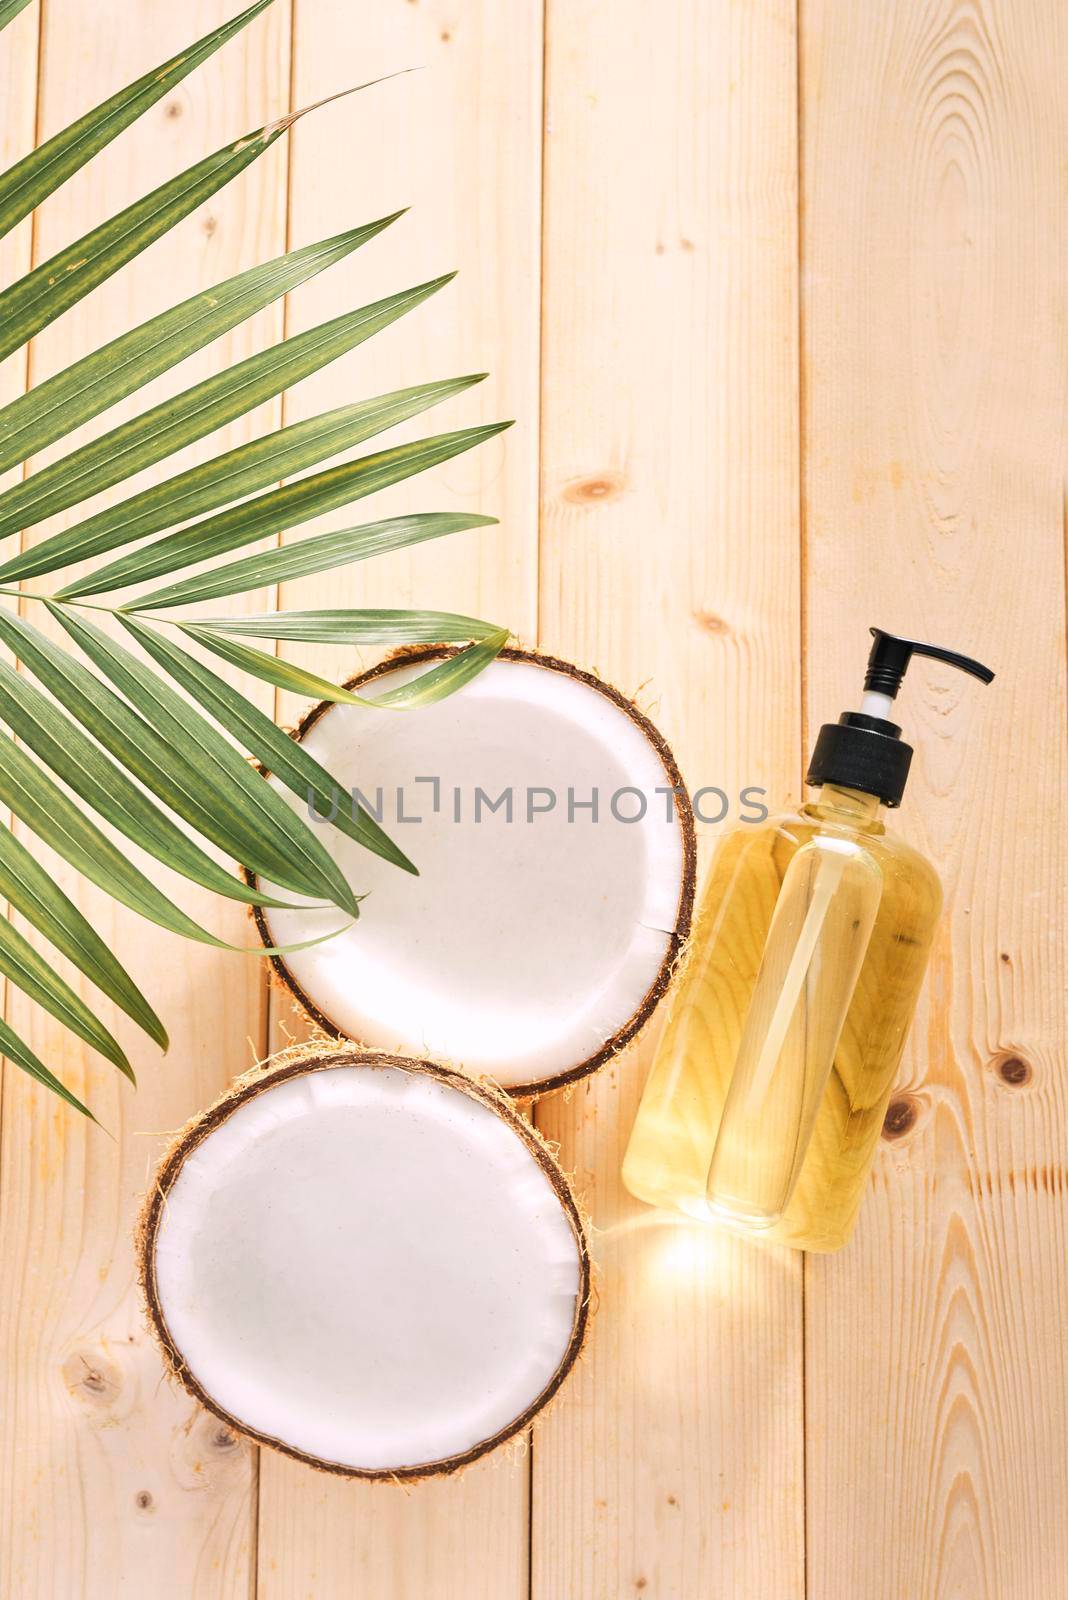 Cracked coconut and a bottle of oil on the table - spa, skincare, haircare and relaxation concept  by makidotvn